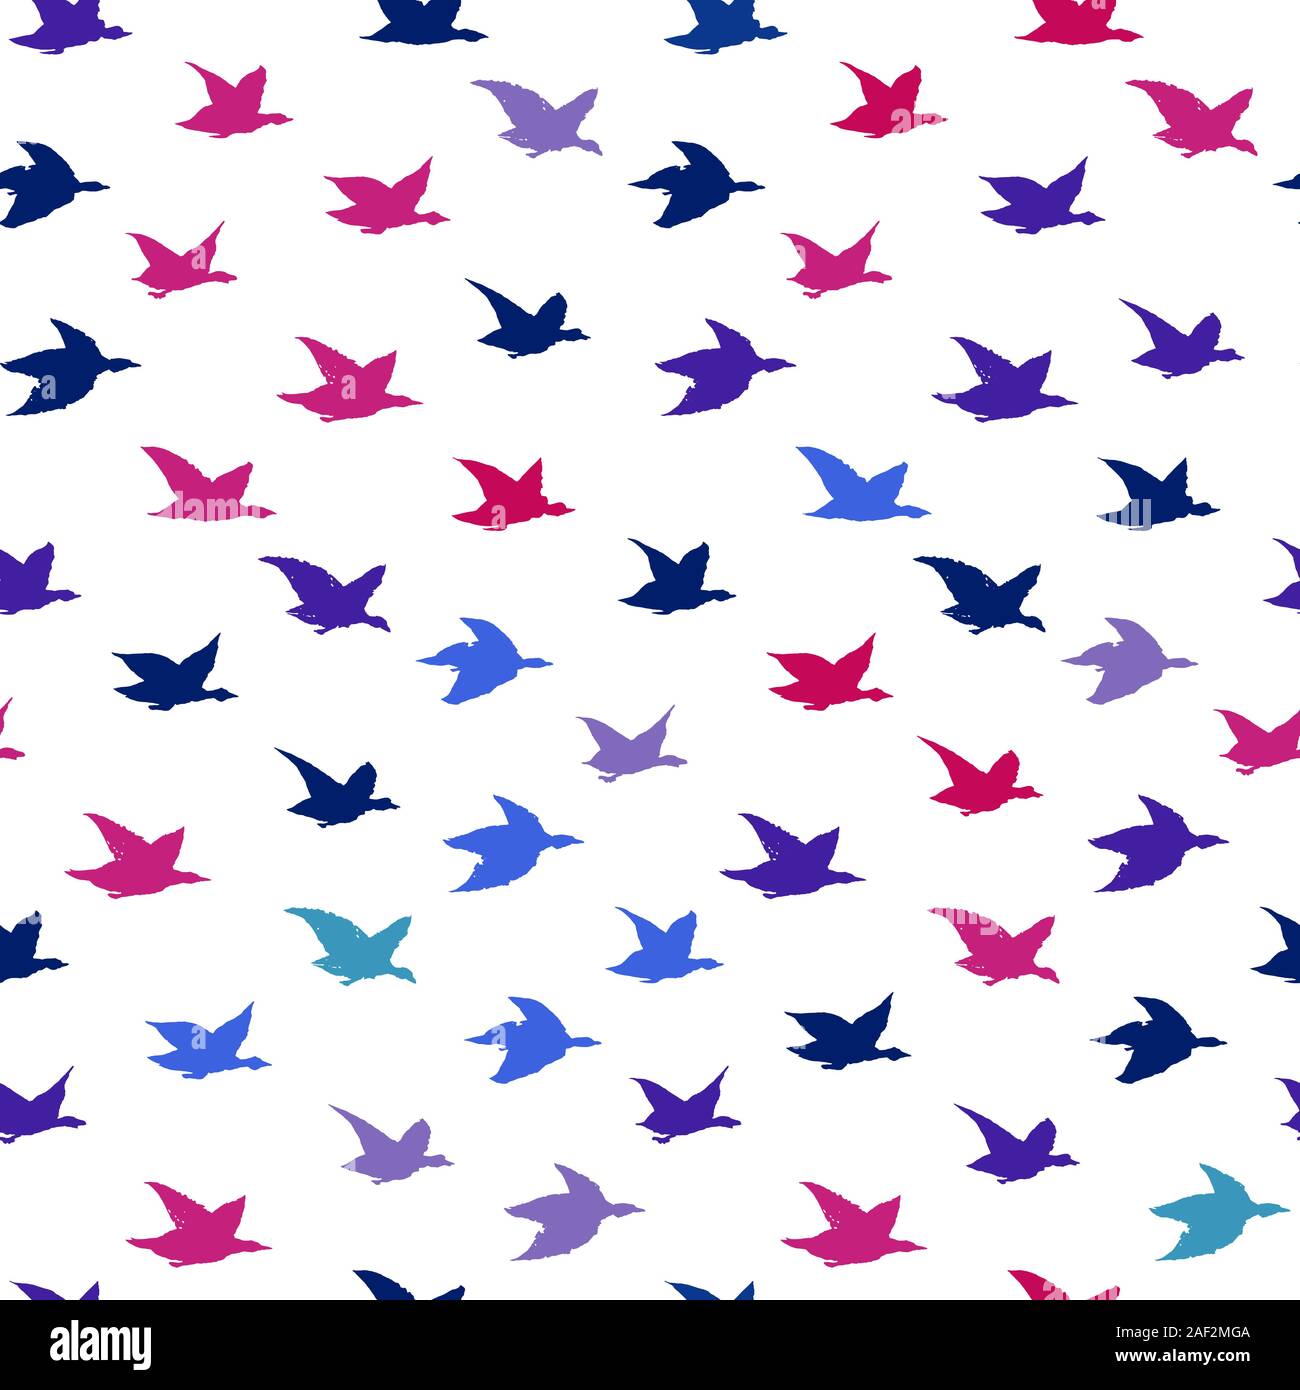 Bright Modern Colorful Crane Birds Japanese Print. Seamless Pattern with Simple Birds Silhouettes for fabrics textile print design, wallpapers, backdrops. Flying elegant swallows Stock Vector